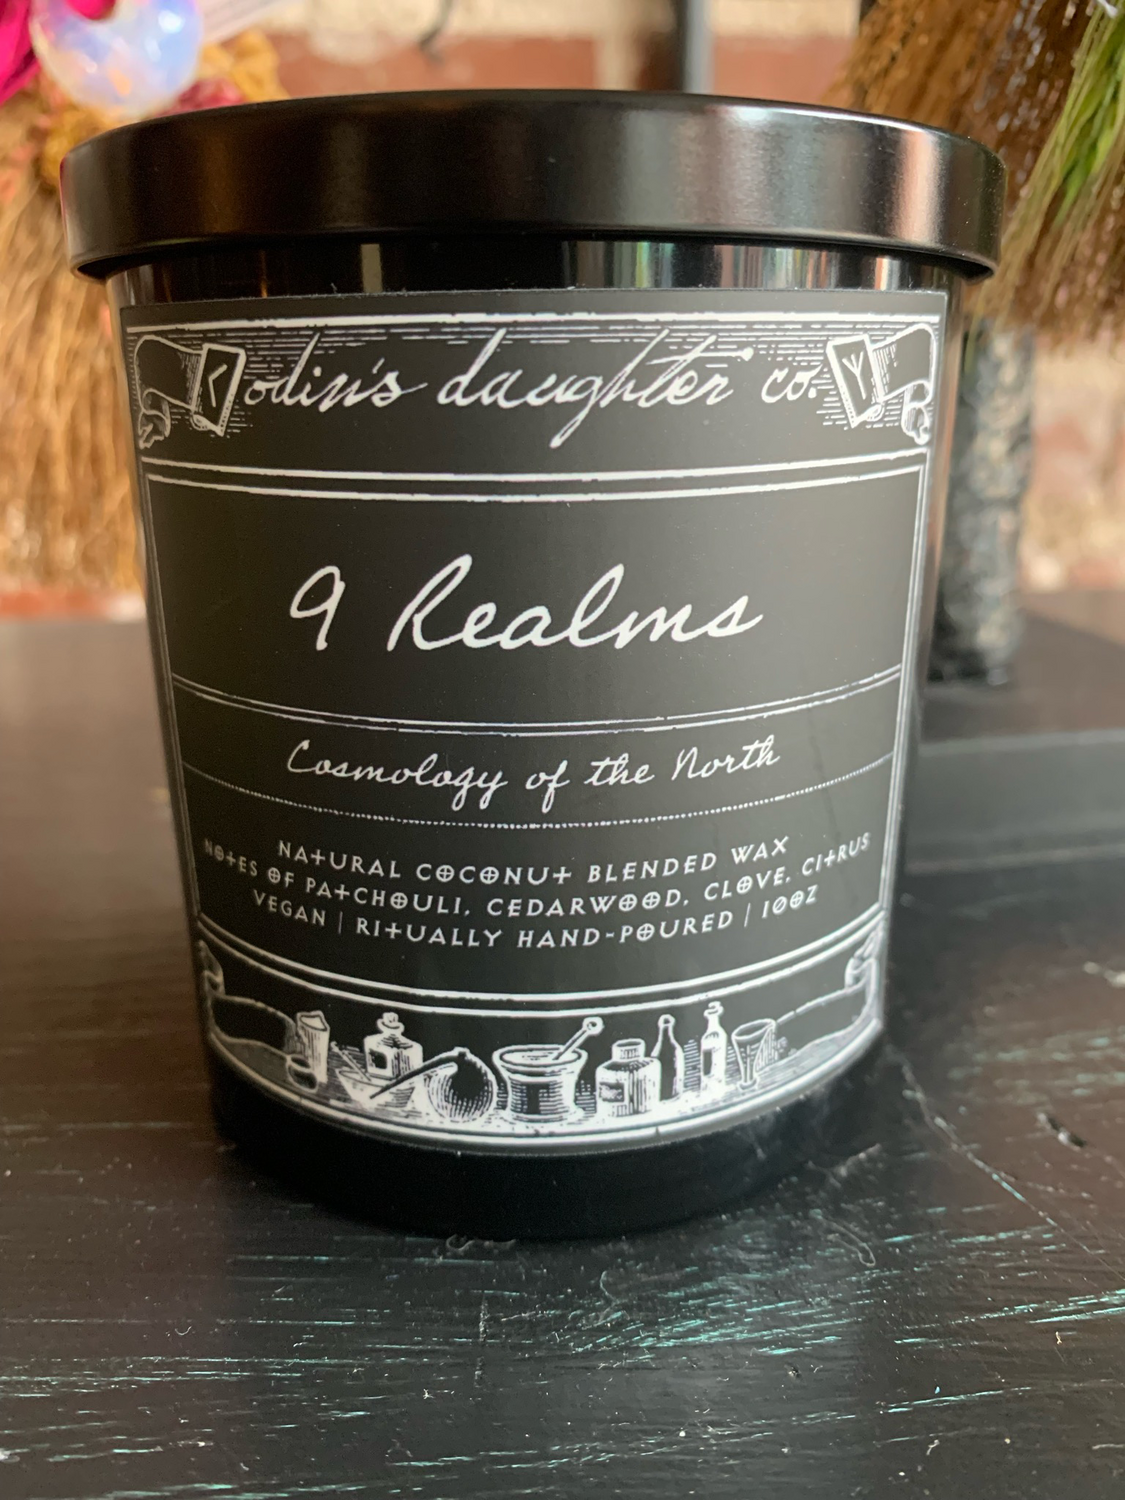 Odin’s Daughter Candle - 9 Realms